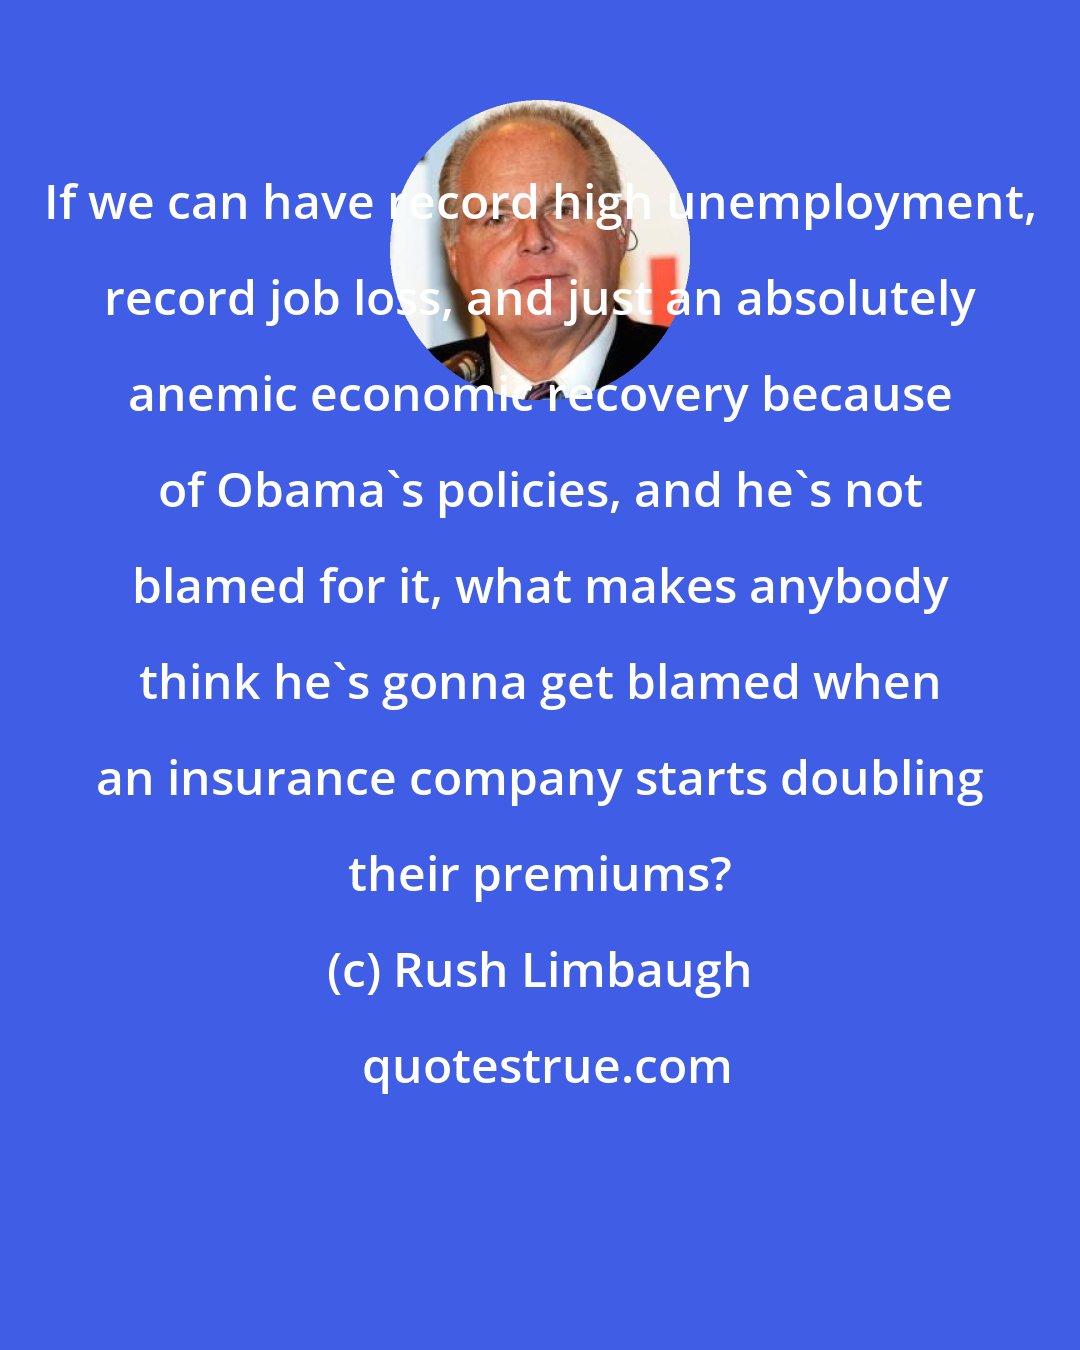 Rush Limbaugh: If we can have record high unemployment, record job loss, and just an absolutely anemic economic recovery because of Obama's policies, and he's not blamed for it, what makes anybody think he's gonna get blamed when an insurance company starts doubling their premiums?